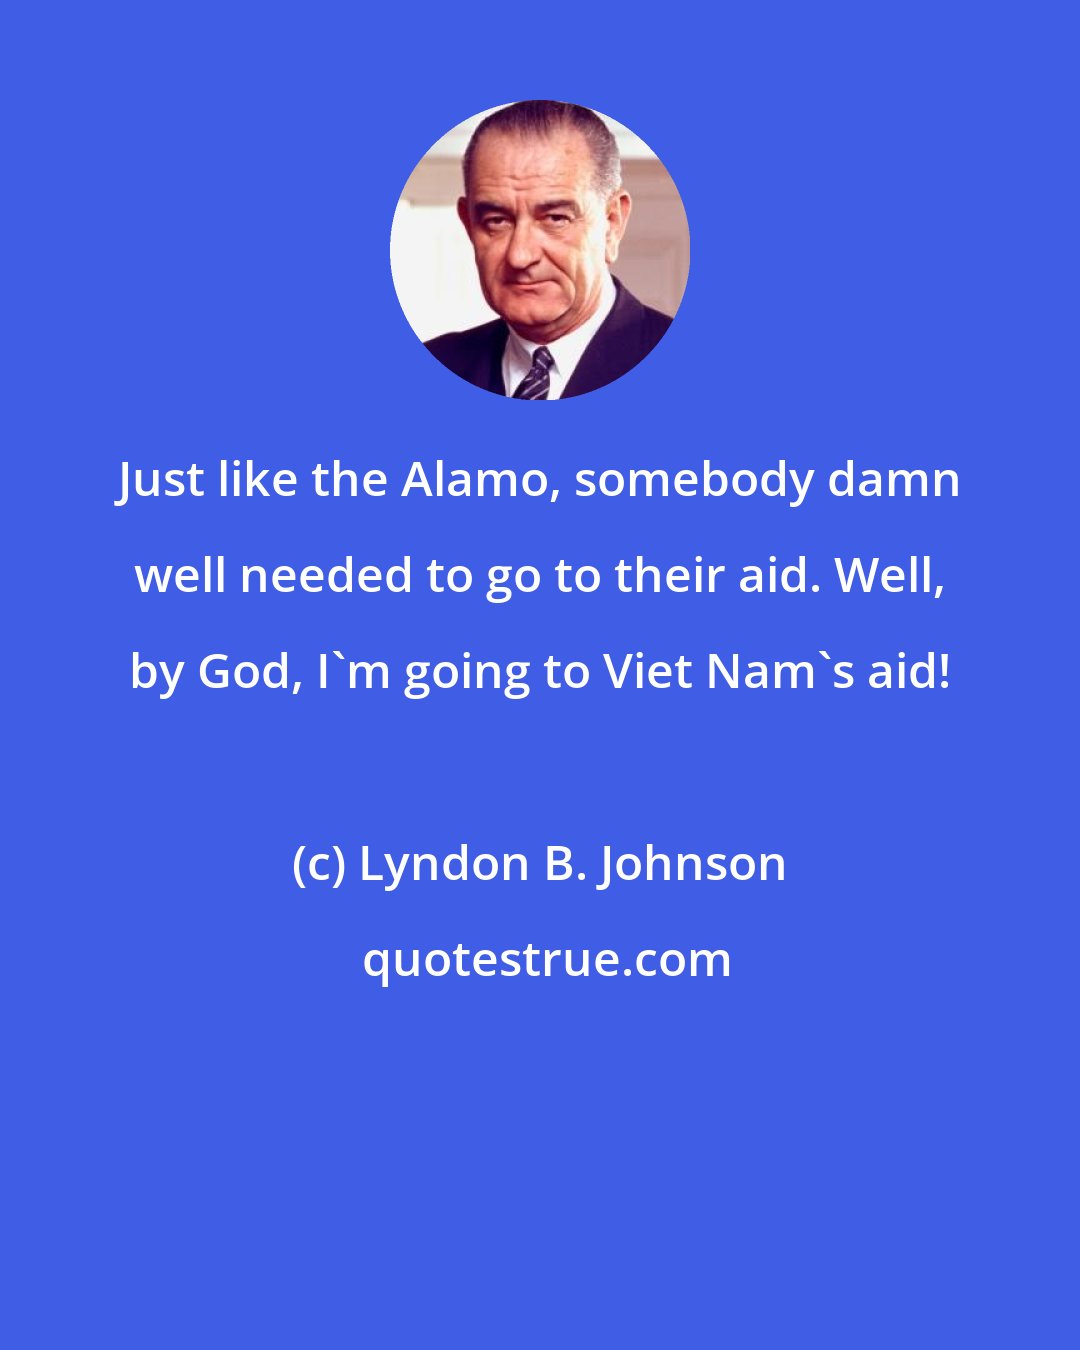 Lyndon B. Johnson: Just like the Alamo, somebody damn well needed to go to their aid. Well, by God, I'm going to Viet Nam's aid!